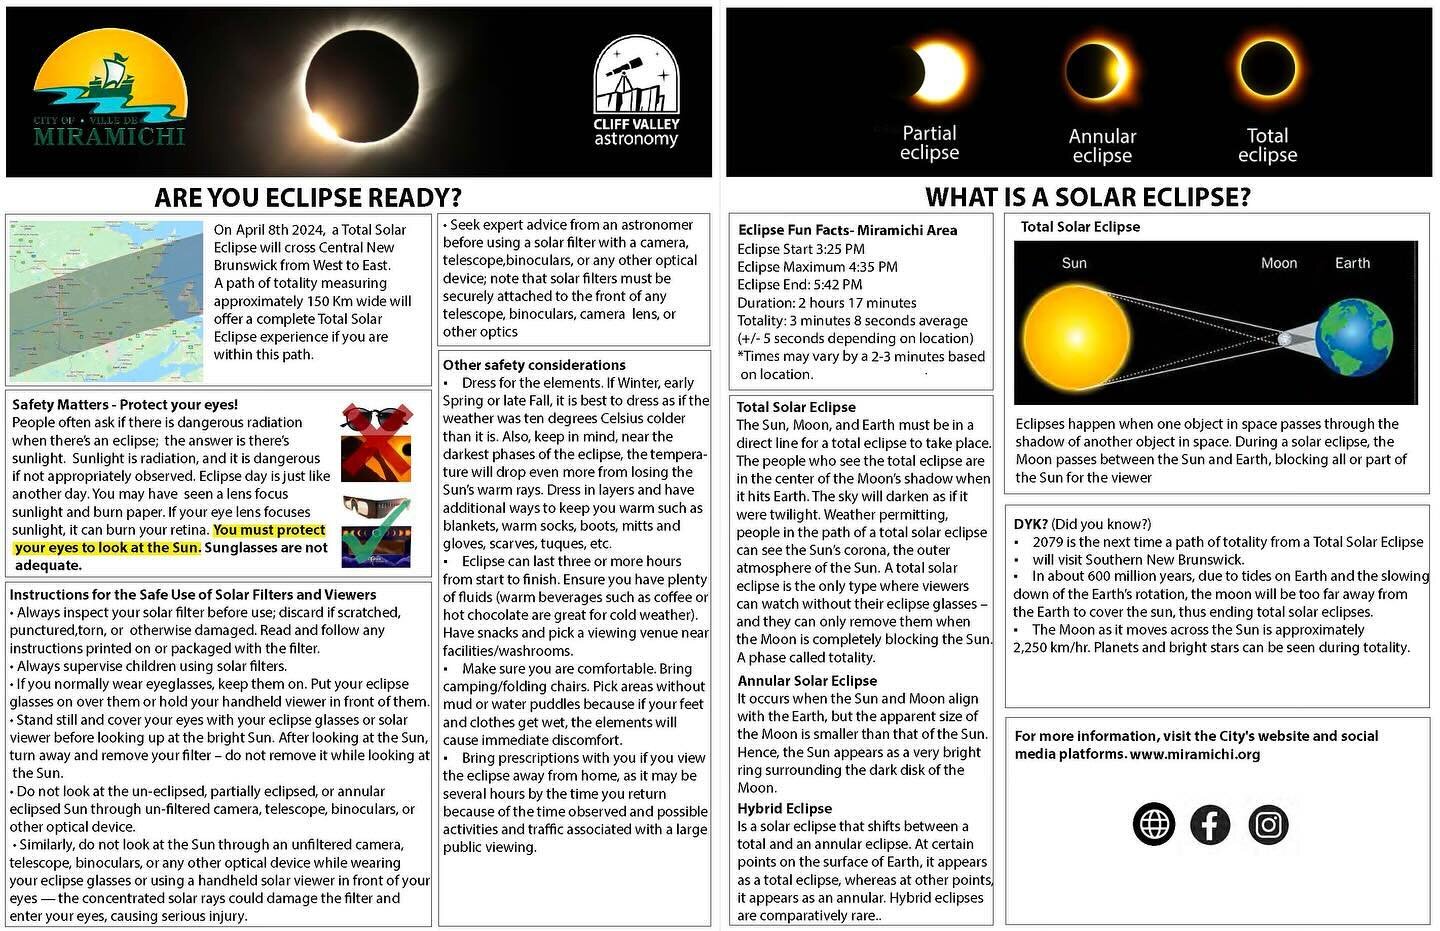 Are you ready for the Miramichi Total Eclipse?